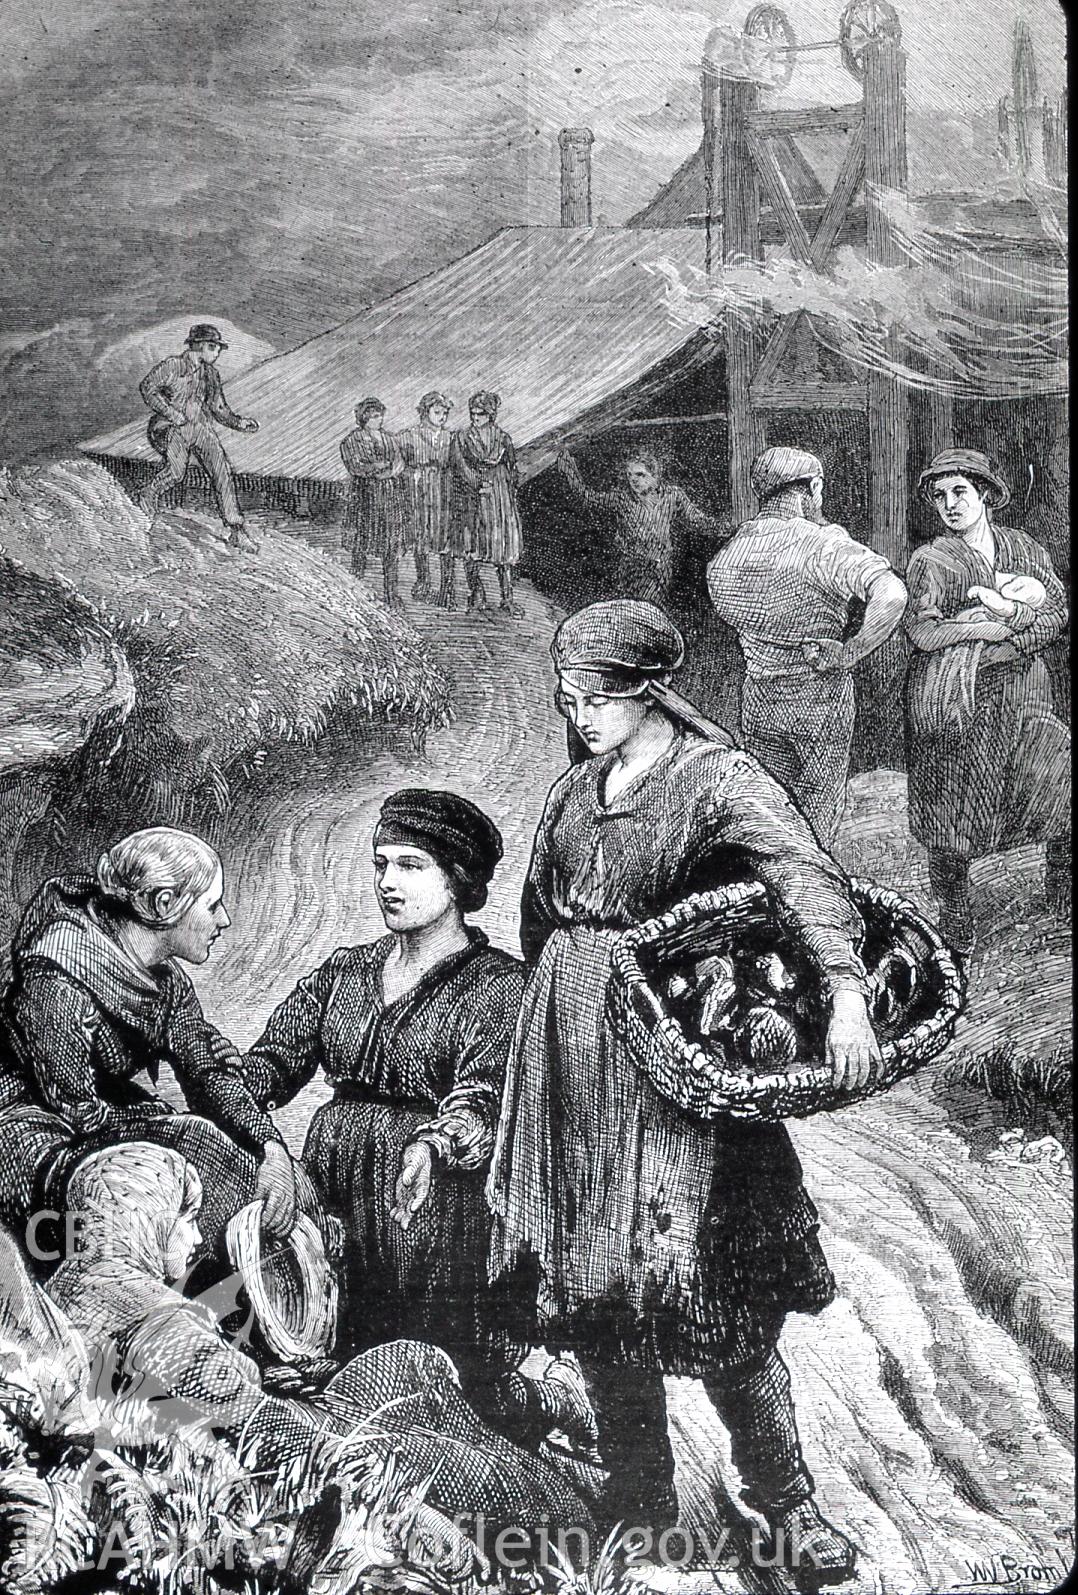 Digital copy of etching from The Graphic entitled: 'The Colliers Srike in South Wales - Tip Girls', dated 1873.